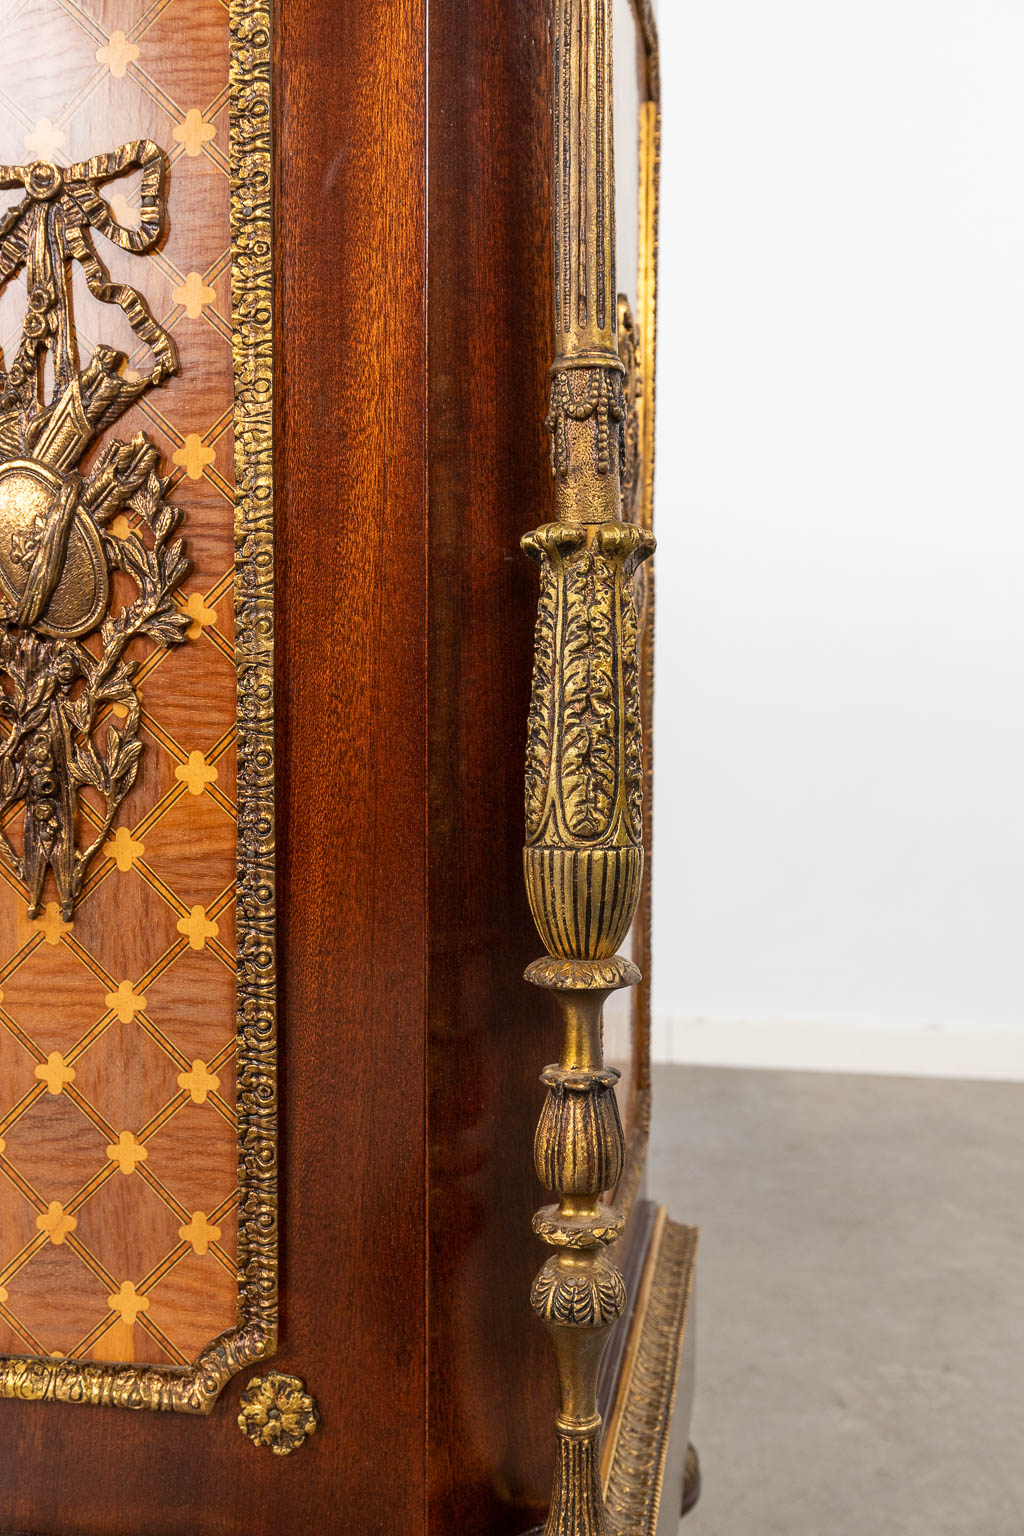 A cabinet, wood veneer mounted with bronze in Louis XVI style with a marble top. 20th C. (D:44 x W:120 x H:106 cm)